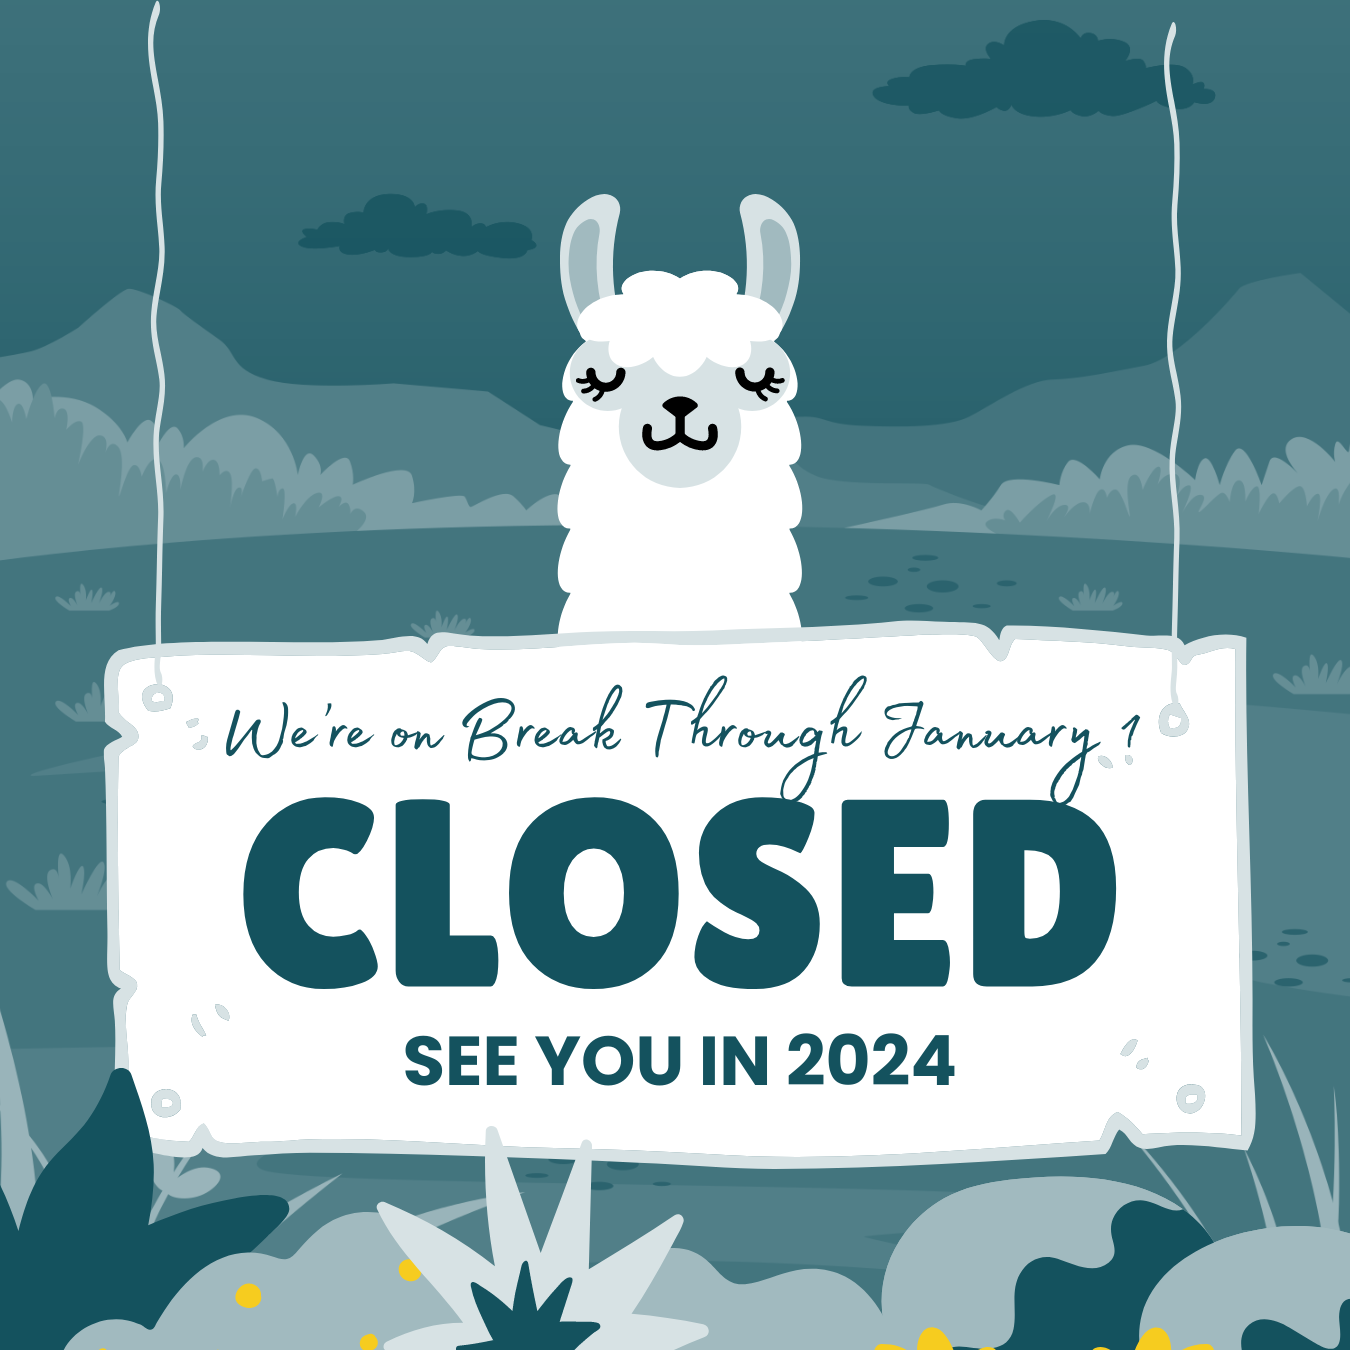 Text graphic that says "We're on break through January 1. Closed. See you in 2024" with an illustration of a llama